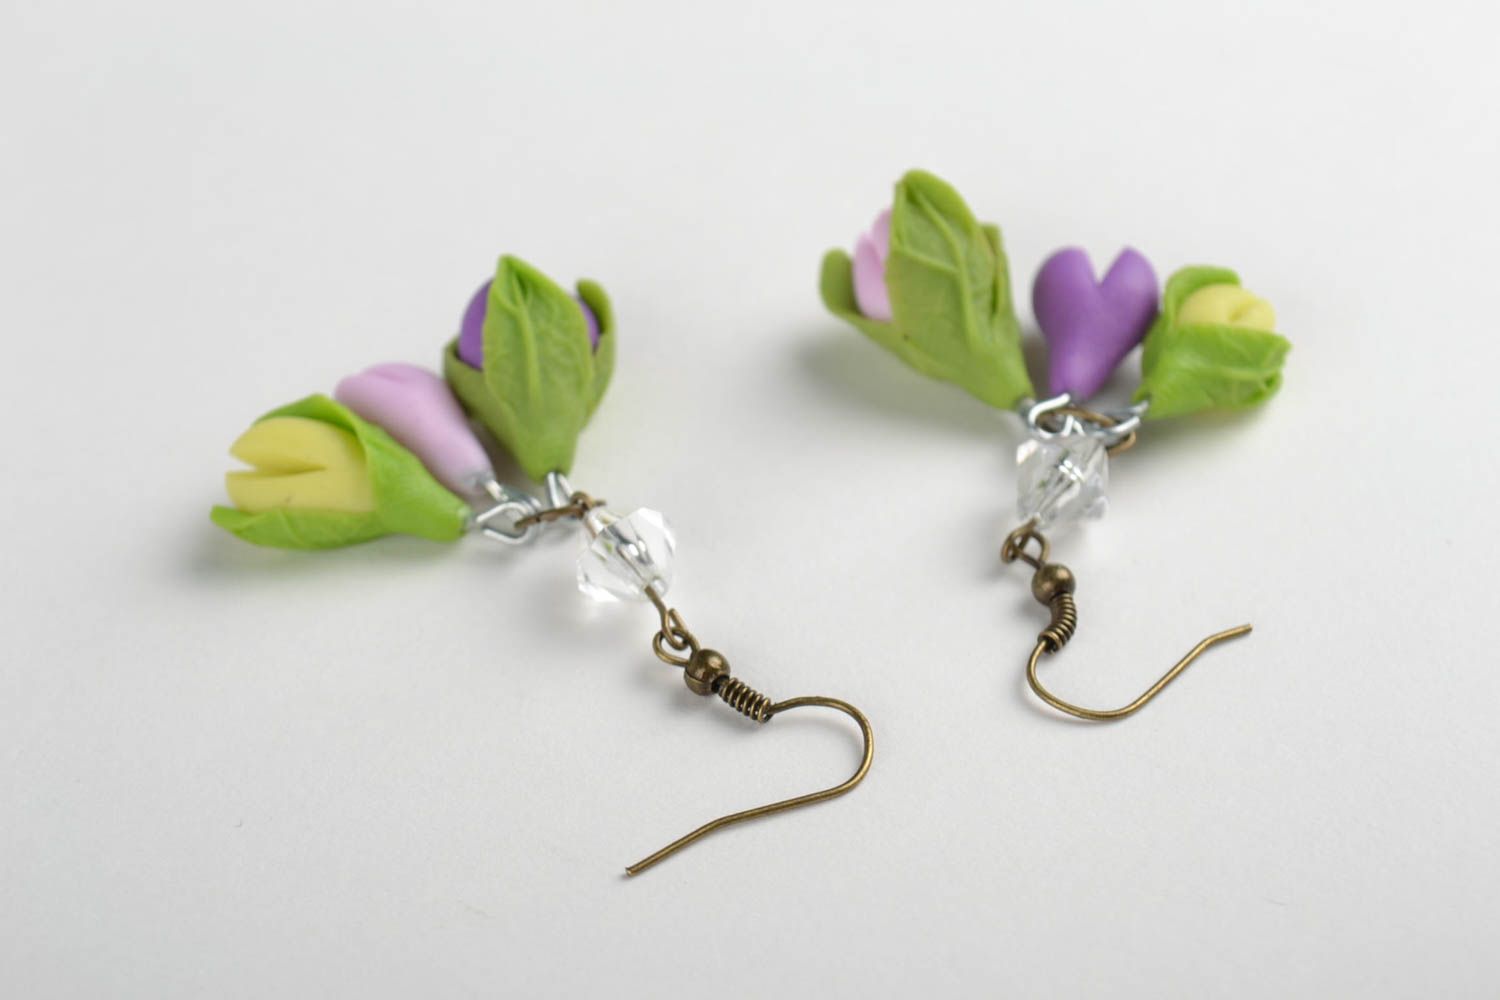 Dangling earrings flower jewelry handmade earrings polymer clay gifts for her photo 4